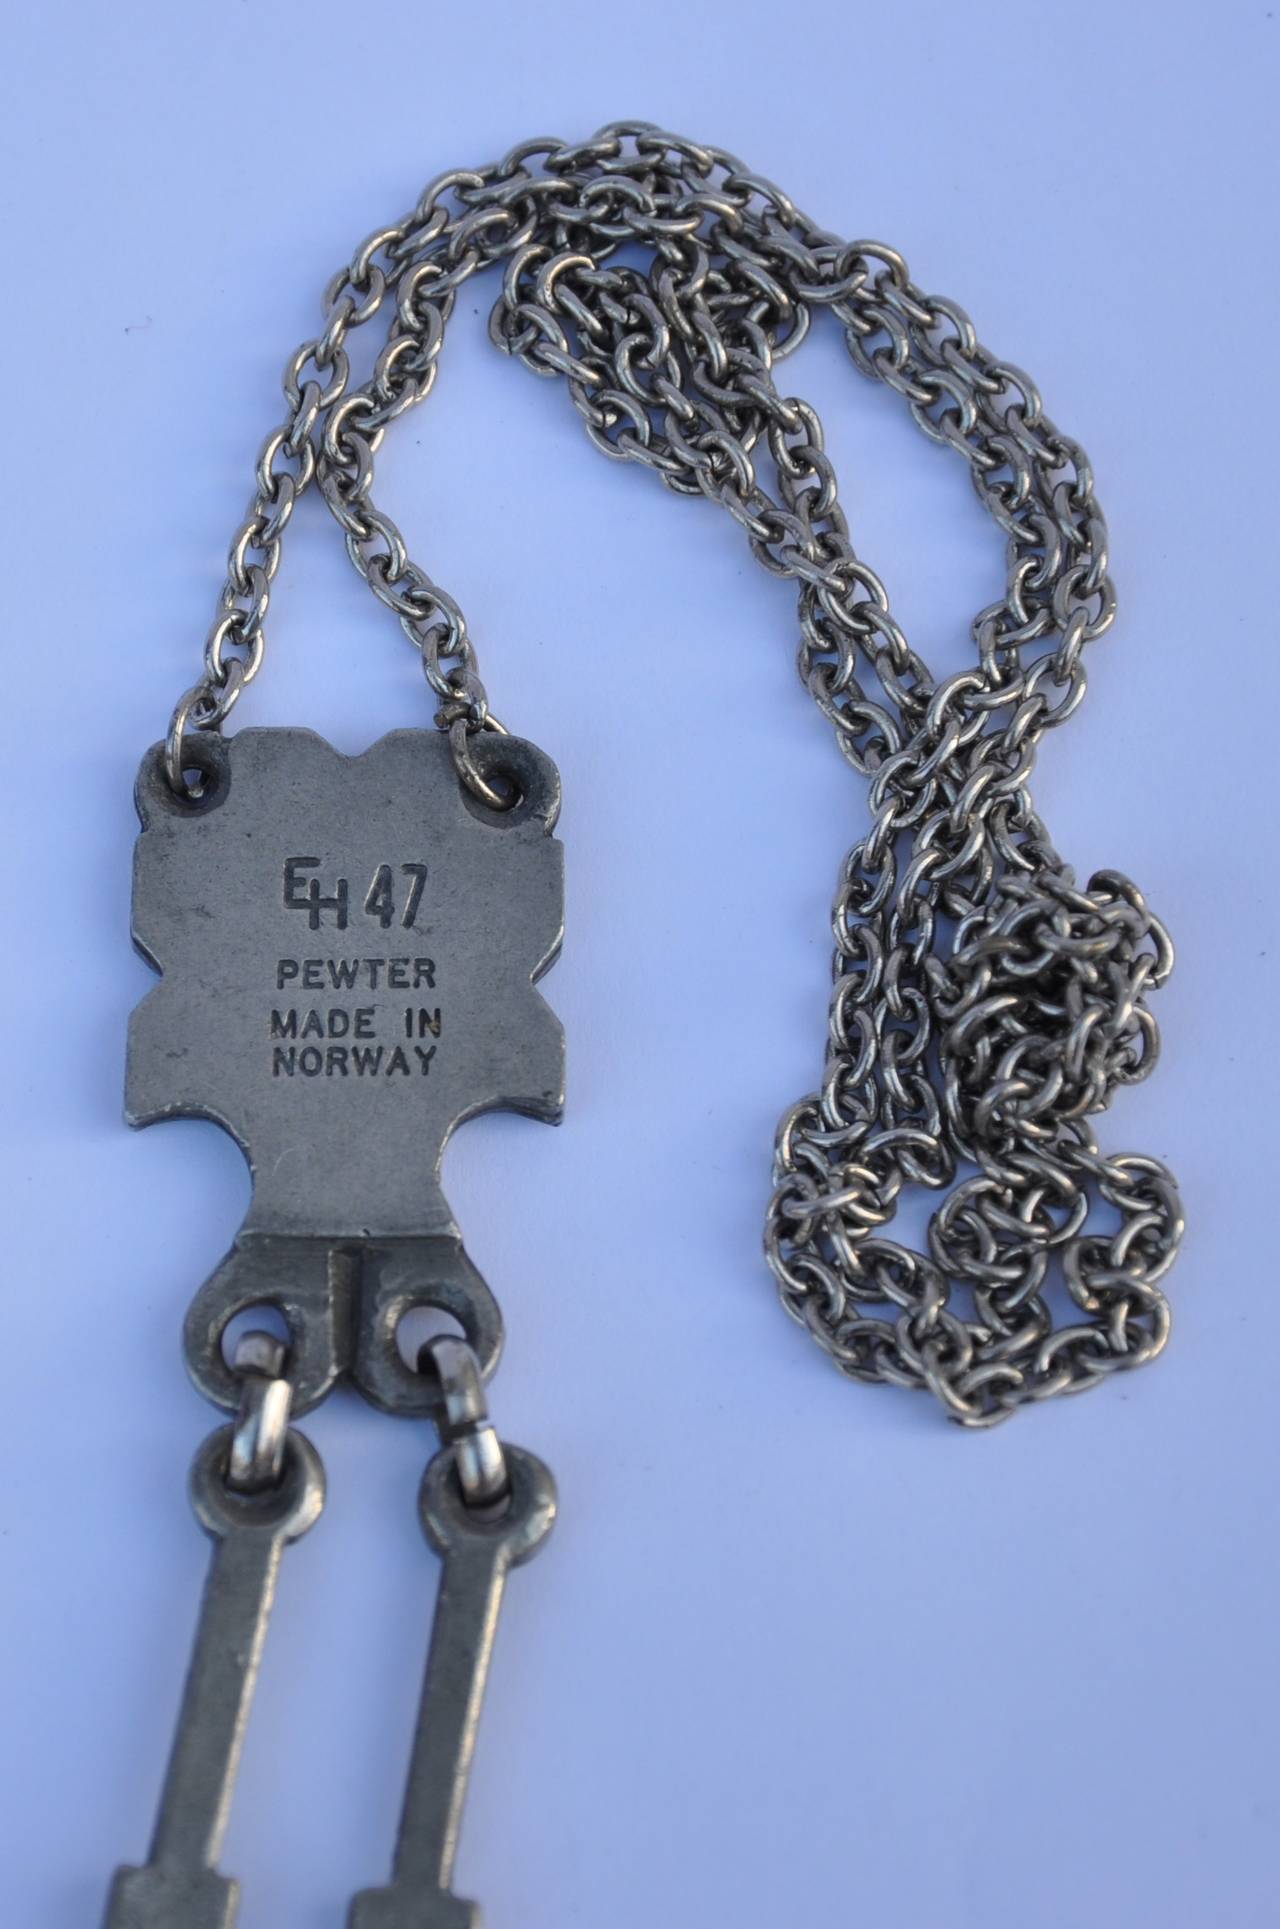 EH 47, made in Norway pewter necklace is combined with a wonderfully designed dangling pendant. Signed and engrave with "EH 47, Pewter, Made in Norway". The necklace measures 28" in length. The pendant measures 1" x 4".